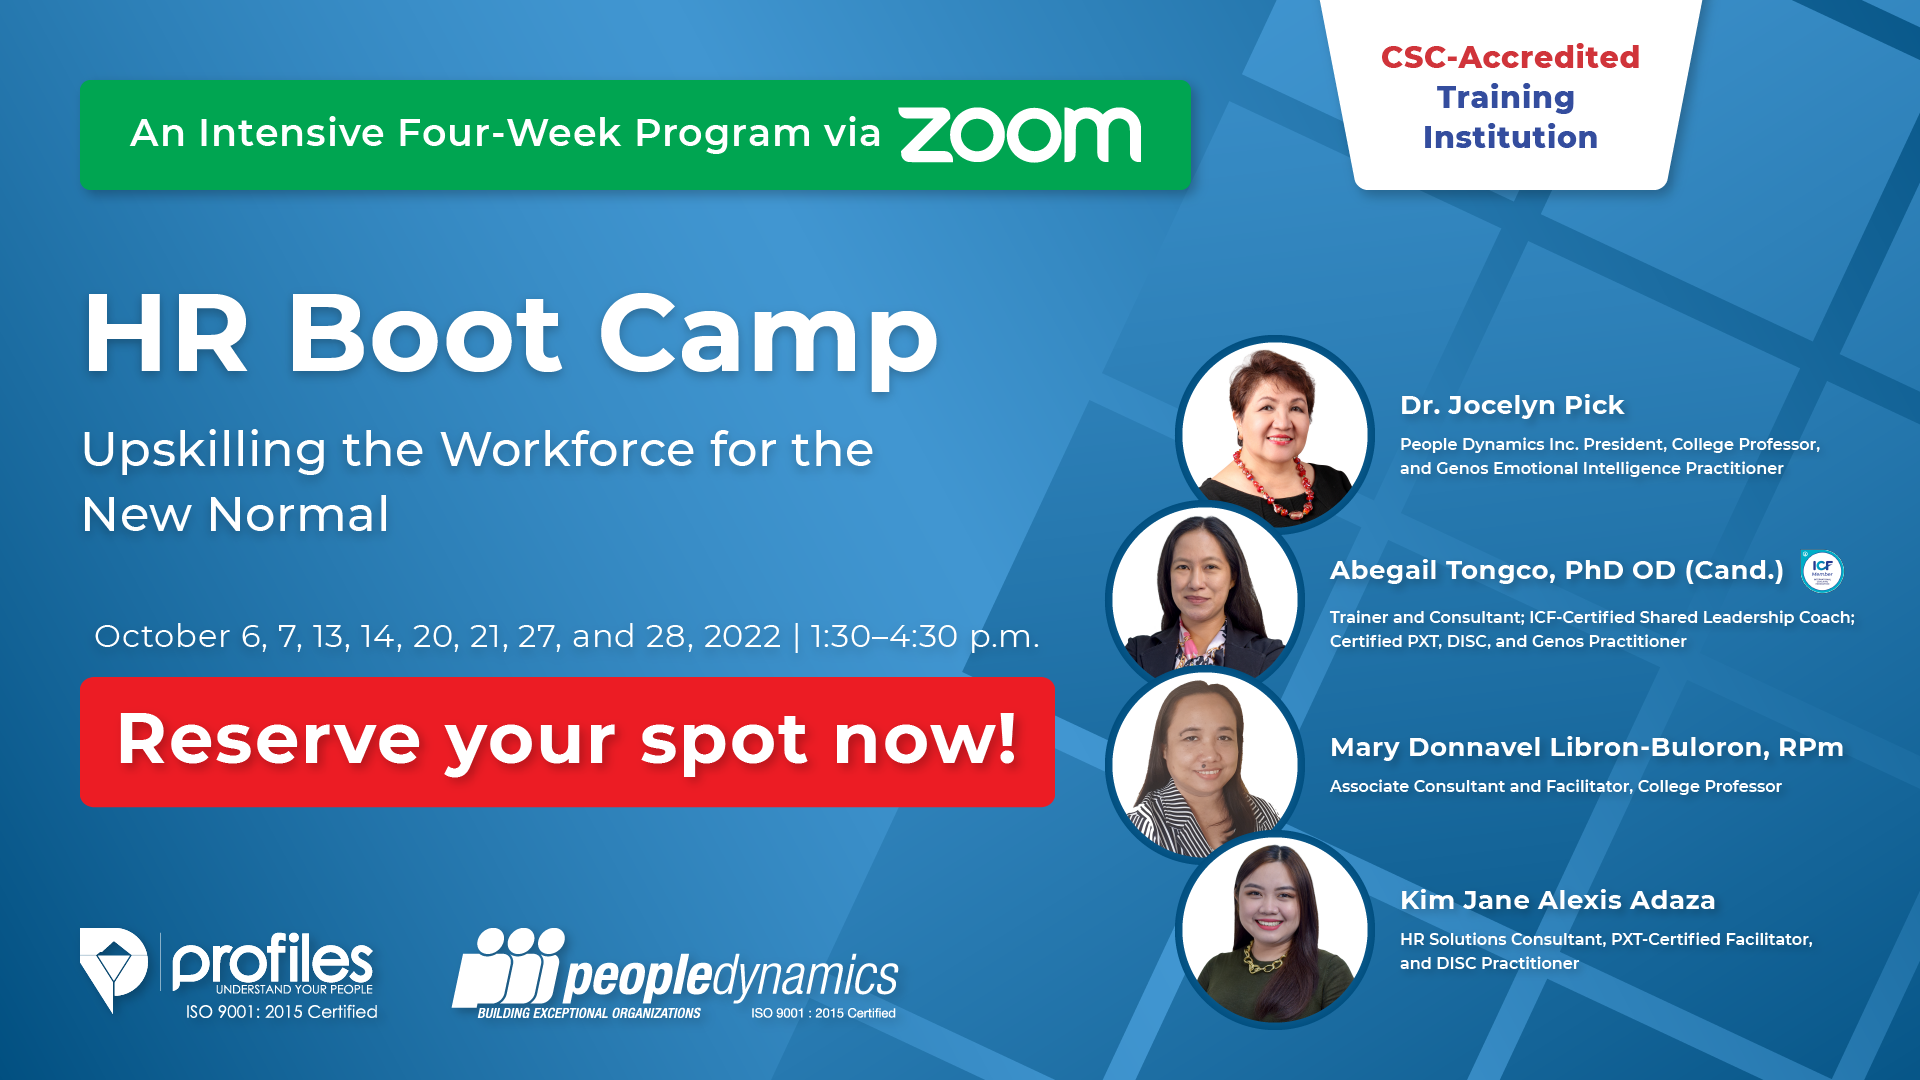 HR Boot Camp: Upskilling the Workforce for the New Normal